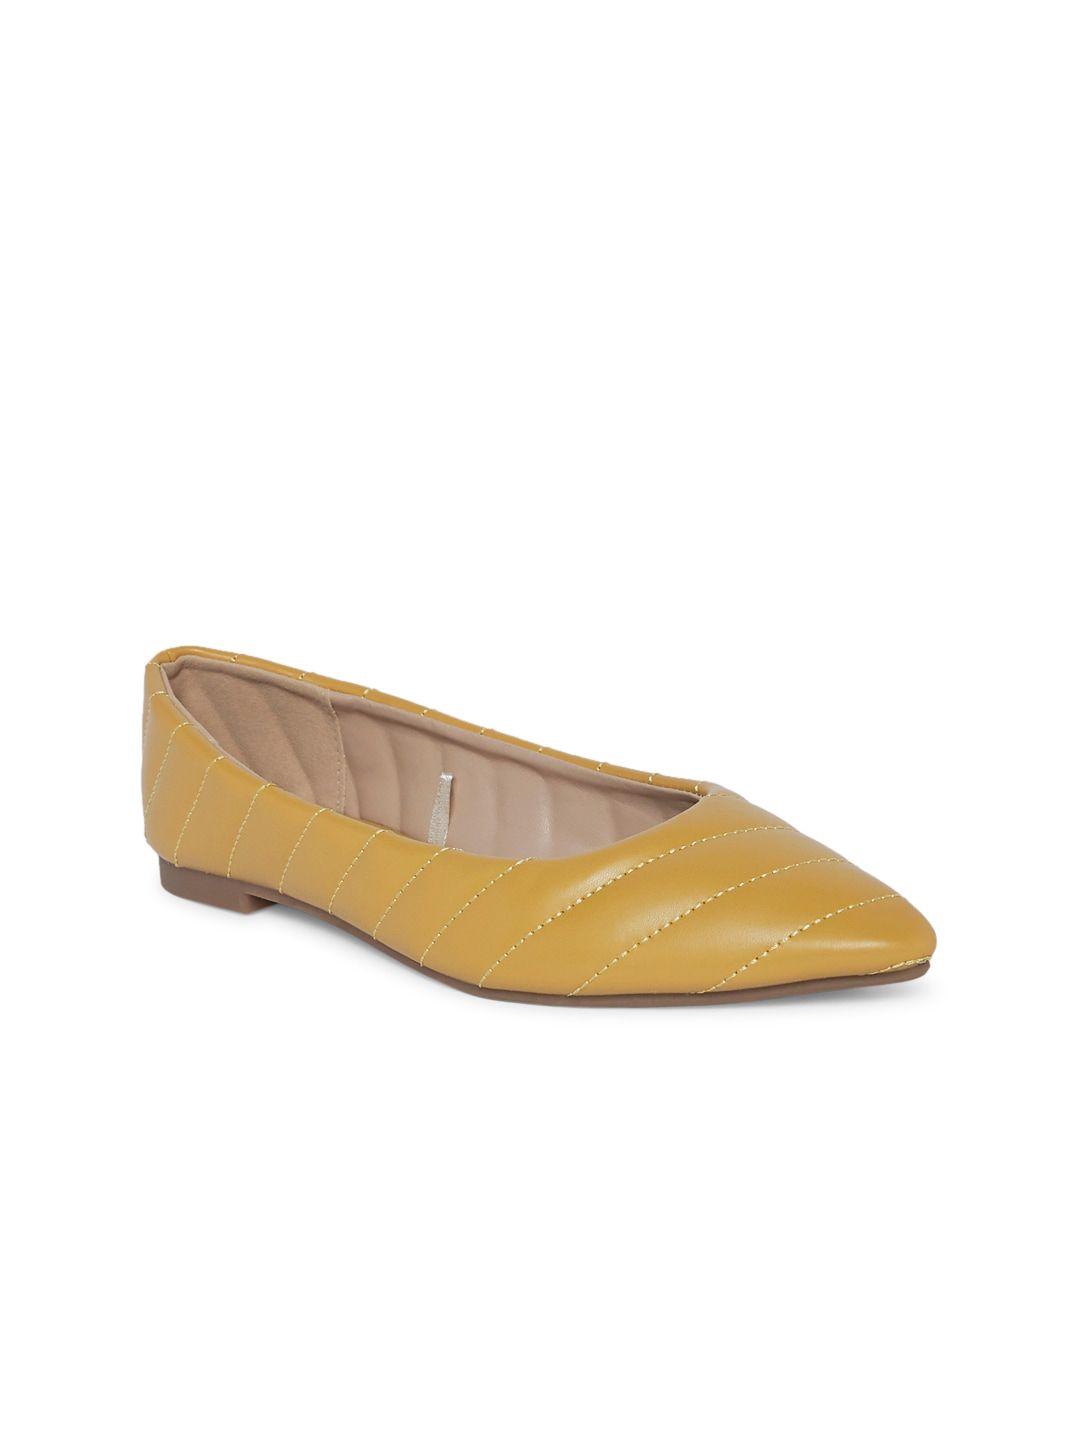 forever glam by pantaloons women yellow ballerinas flats